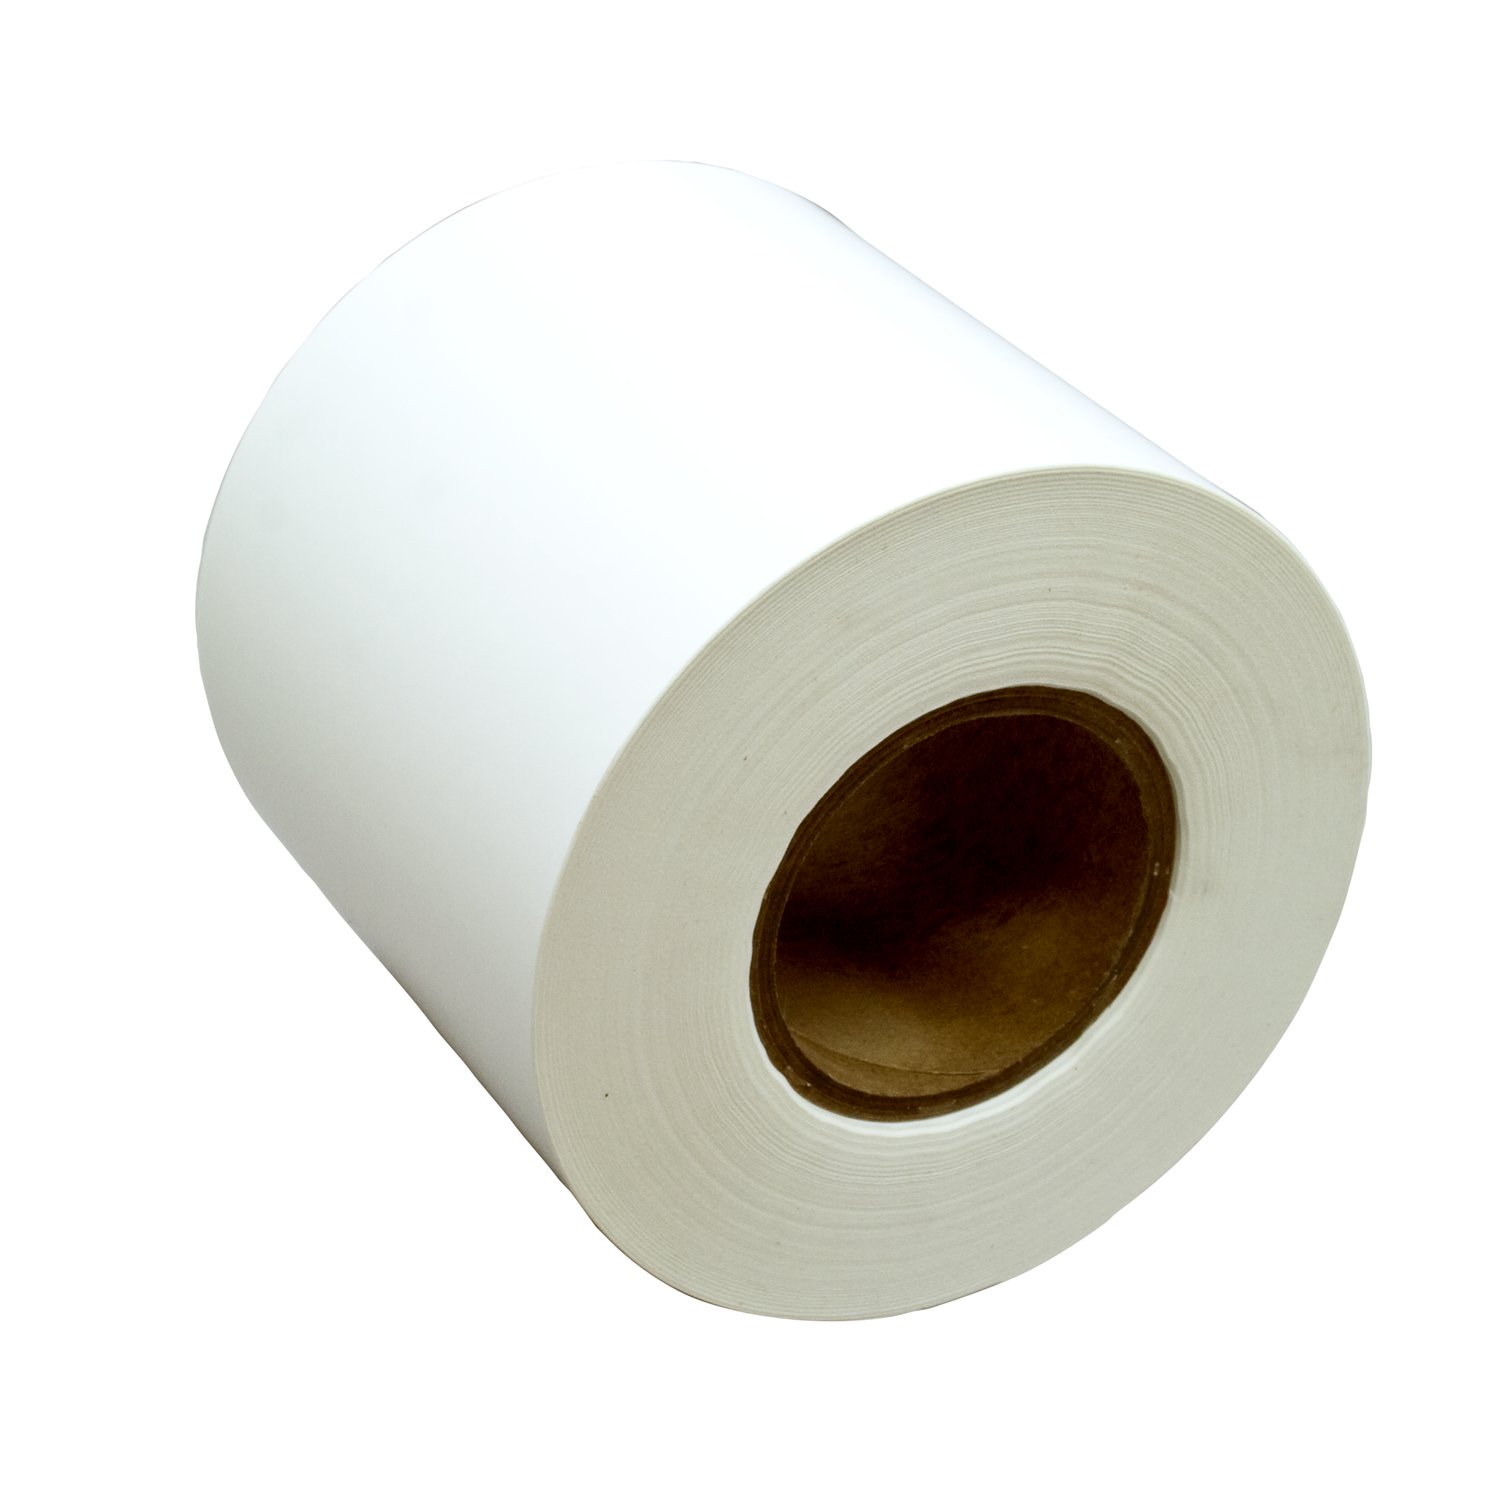 Custom 0.09mm Thickness Colored Aluminum Foil Roll For Household